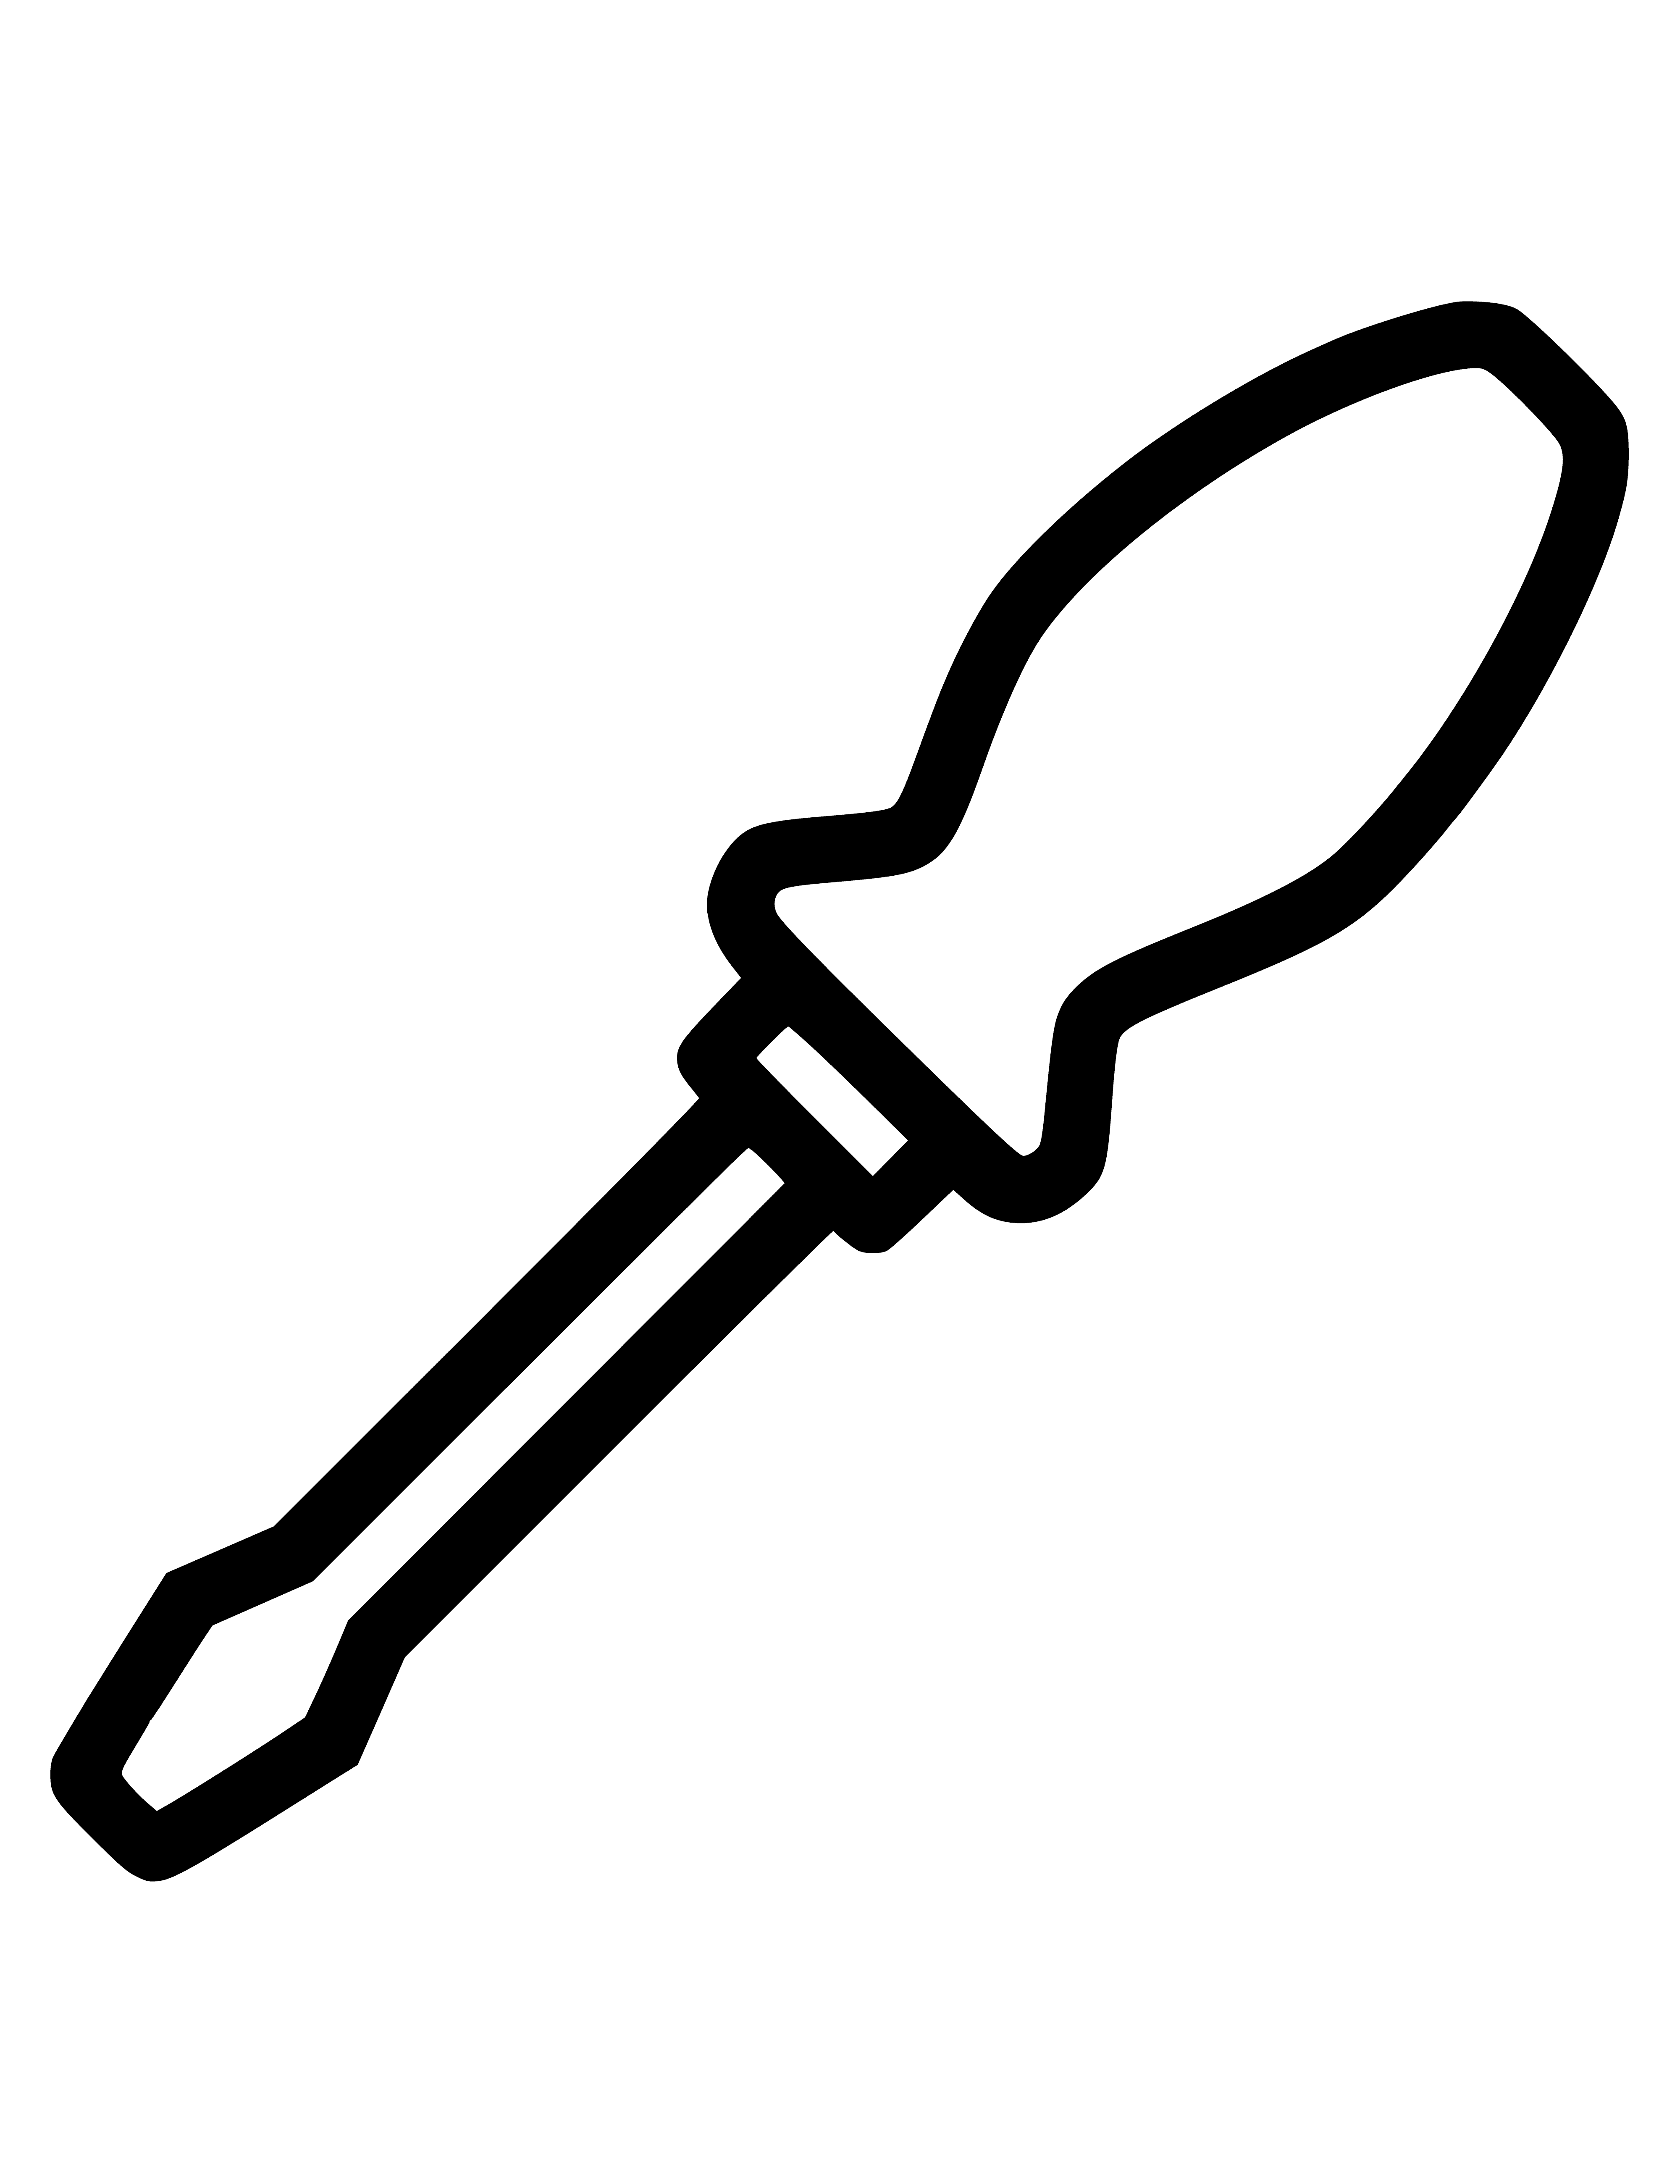 coloring page: Screwdriver has a silver shaft, black handle, and curved tip.